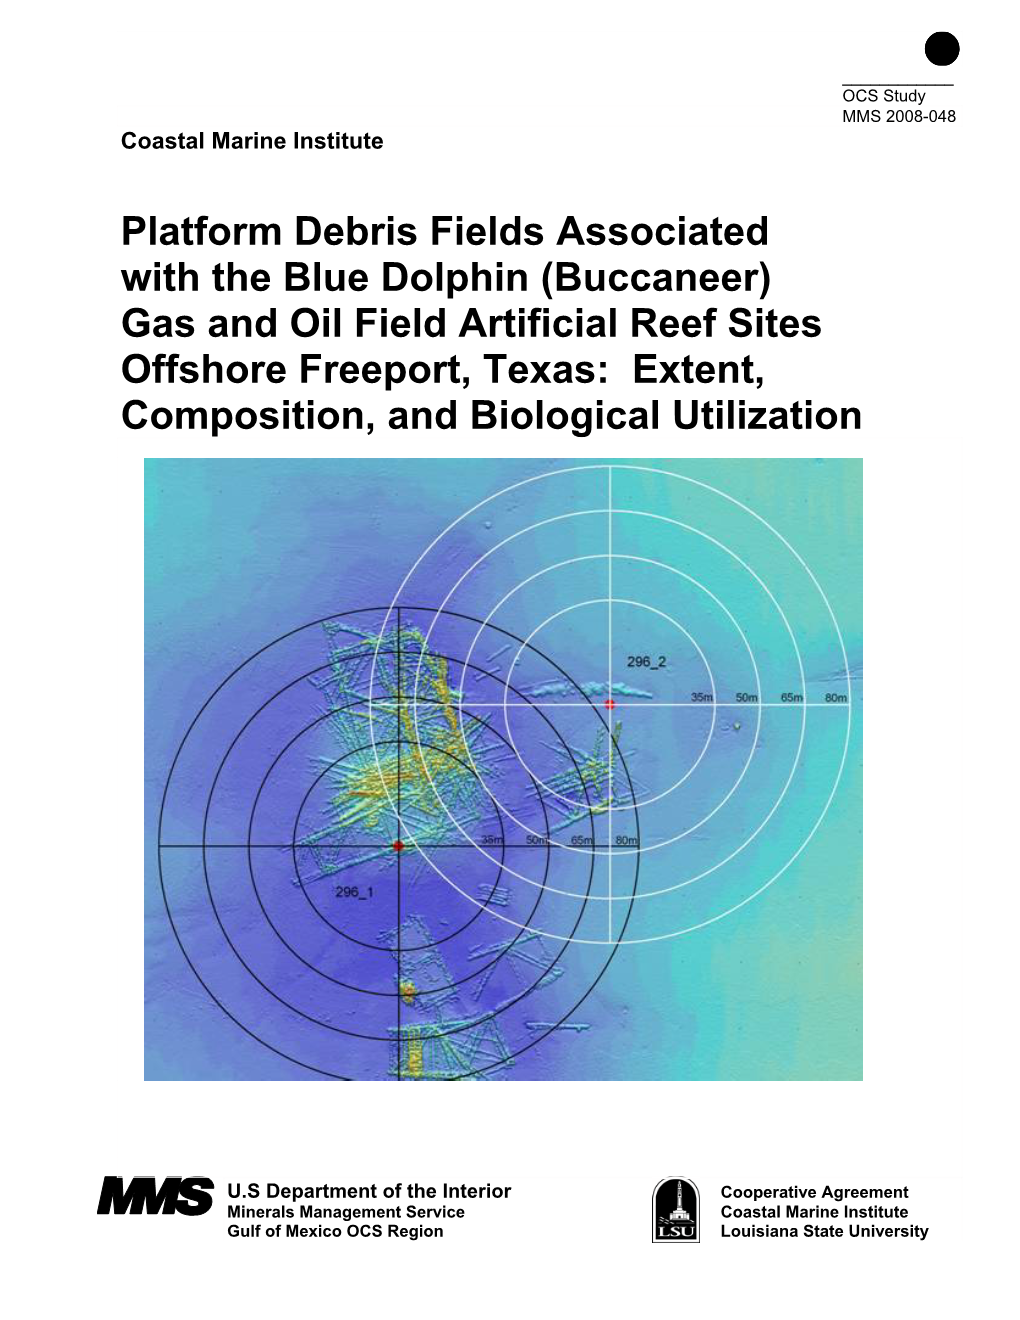 Buccaneer) Gas and Oil Field Artificial Reef Sites Offshore Freeport, Texas: Extent, Composition, and Biological Utilization